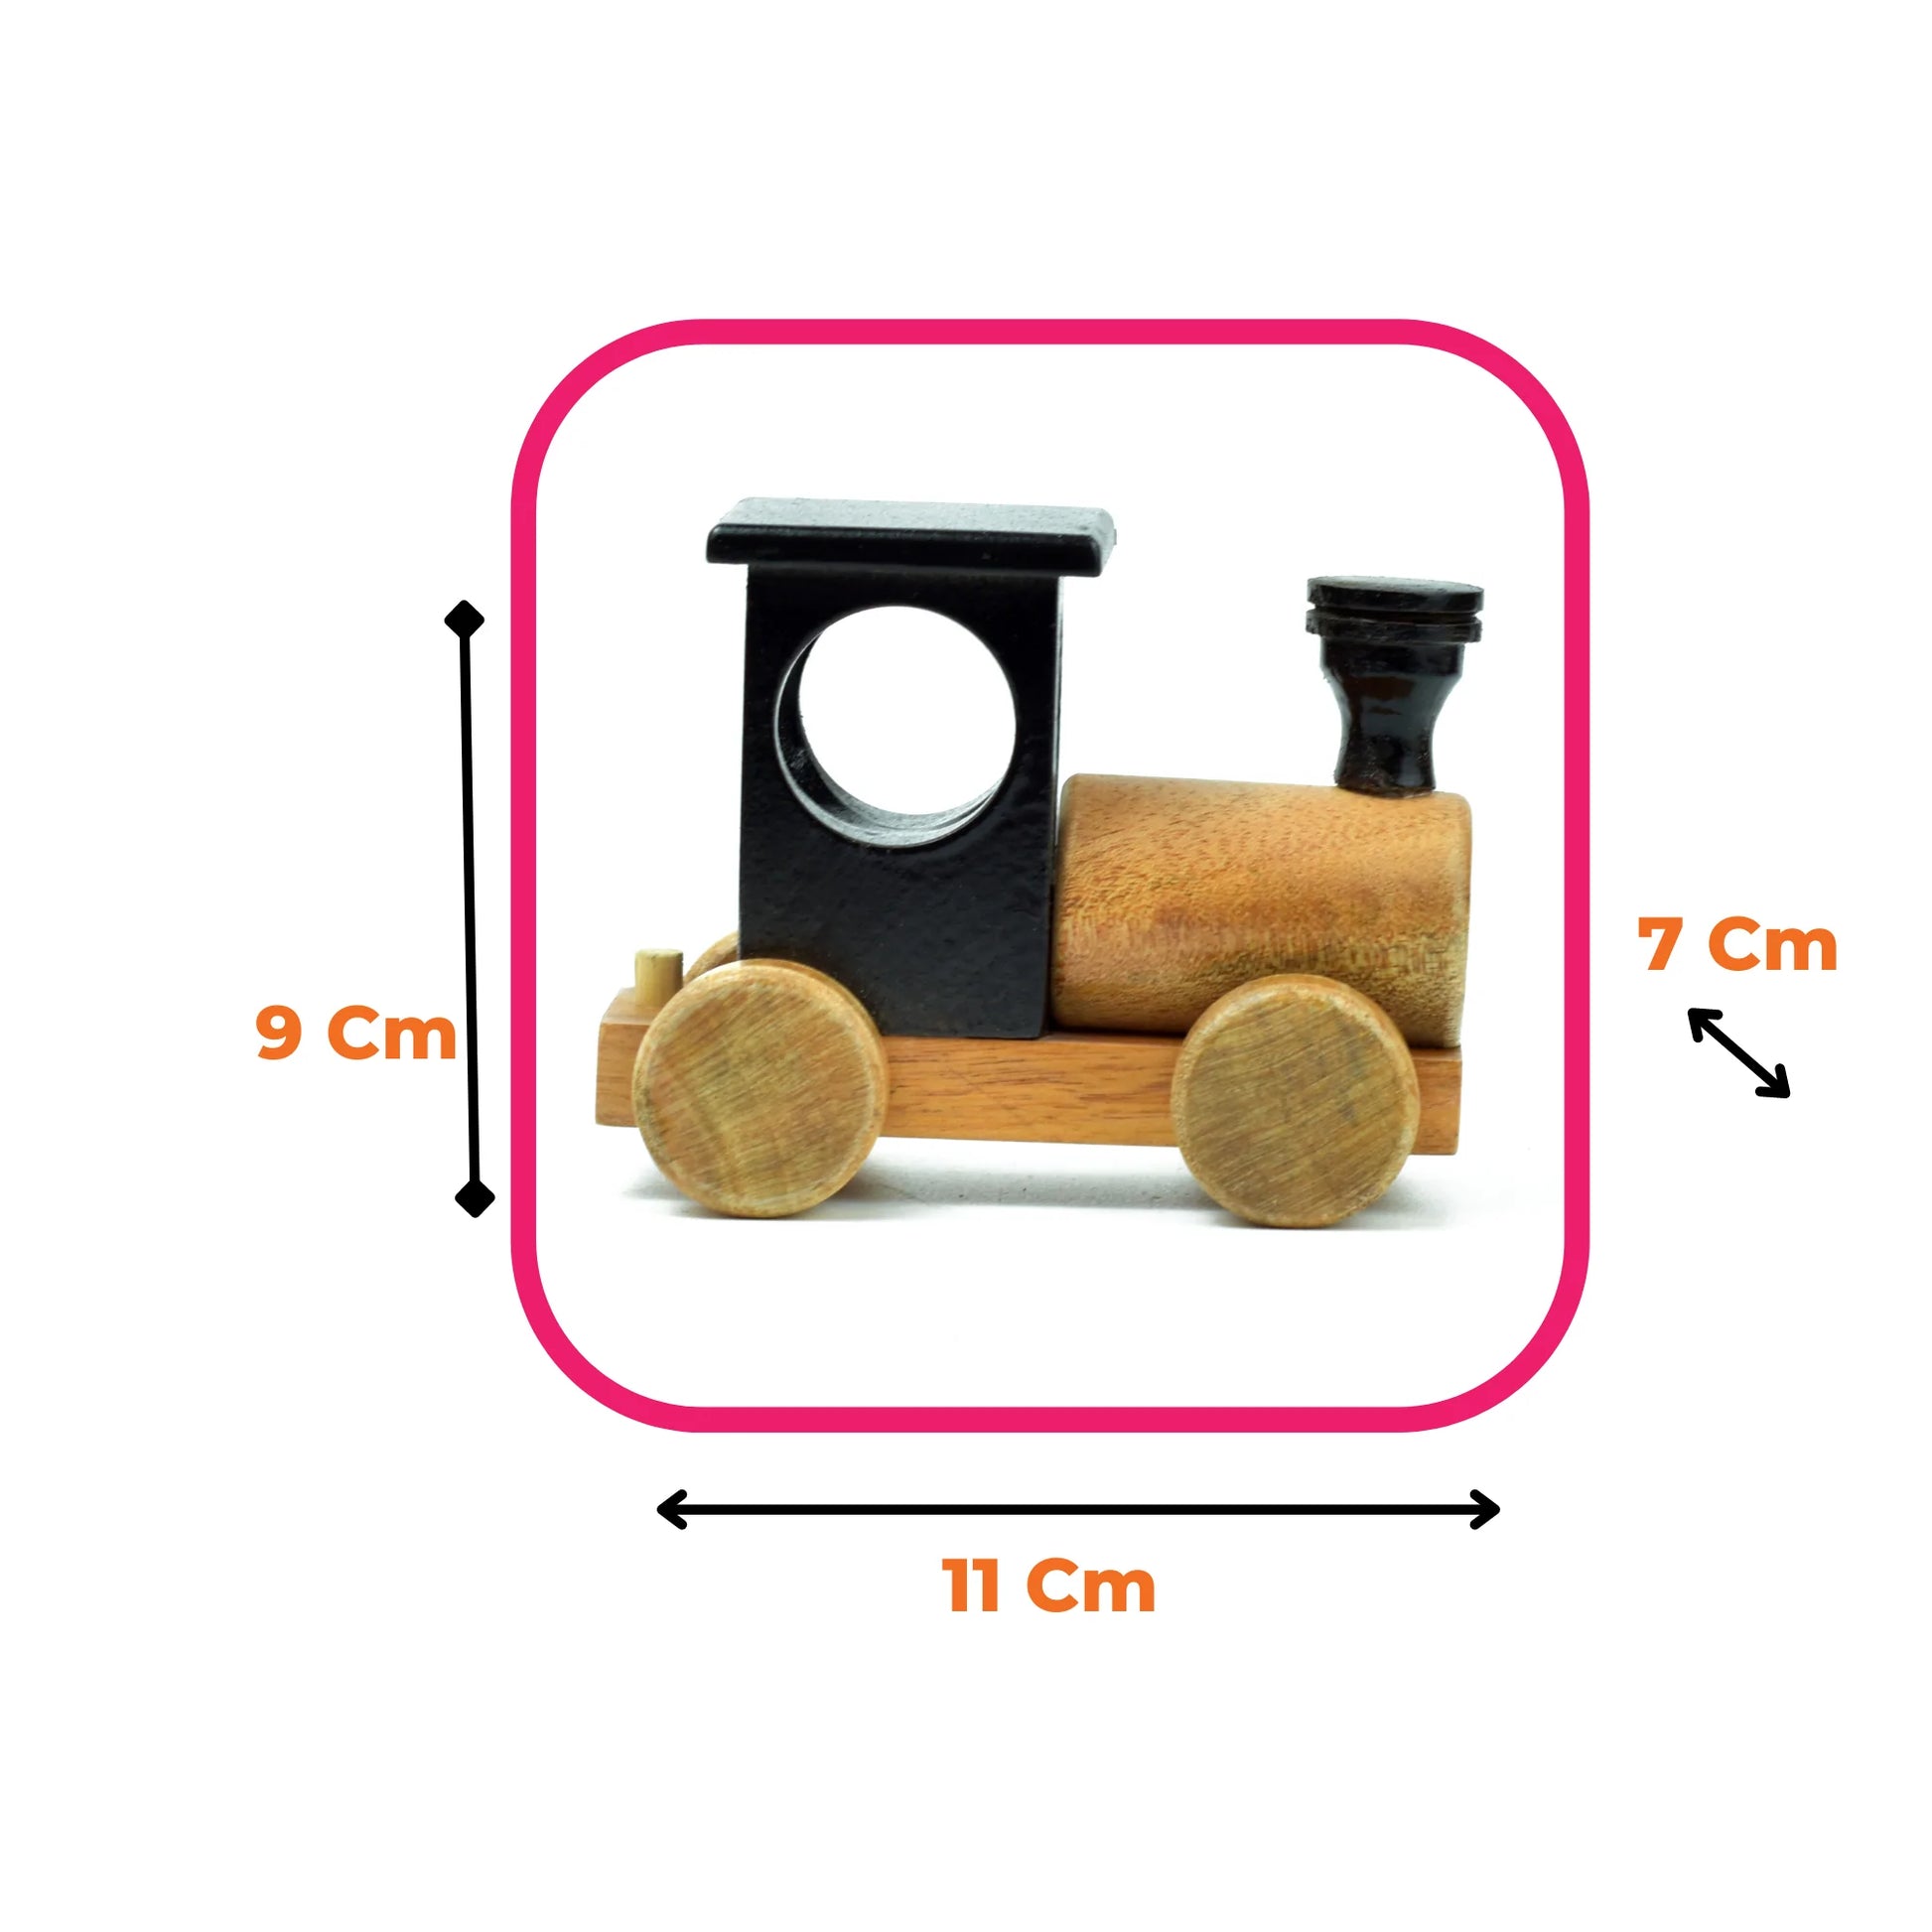 Buy Wooden Train Play Toy - SkilloToys.com